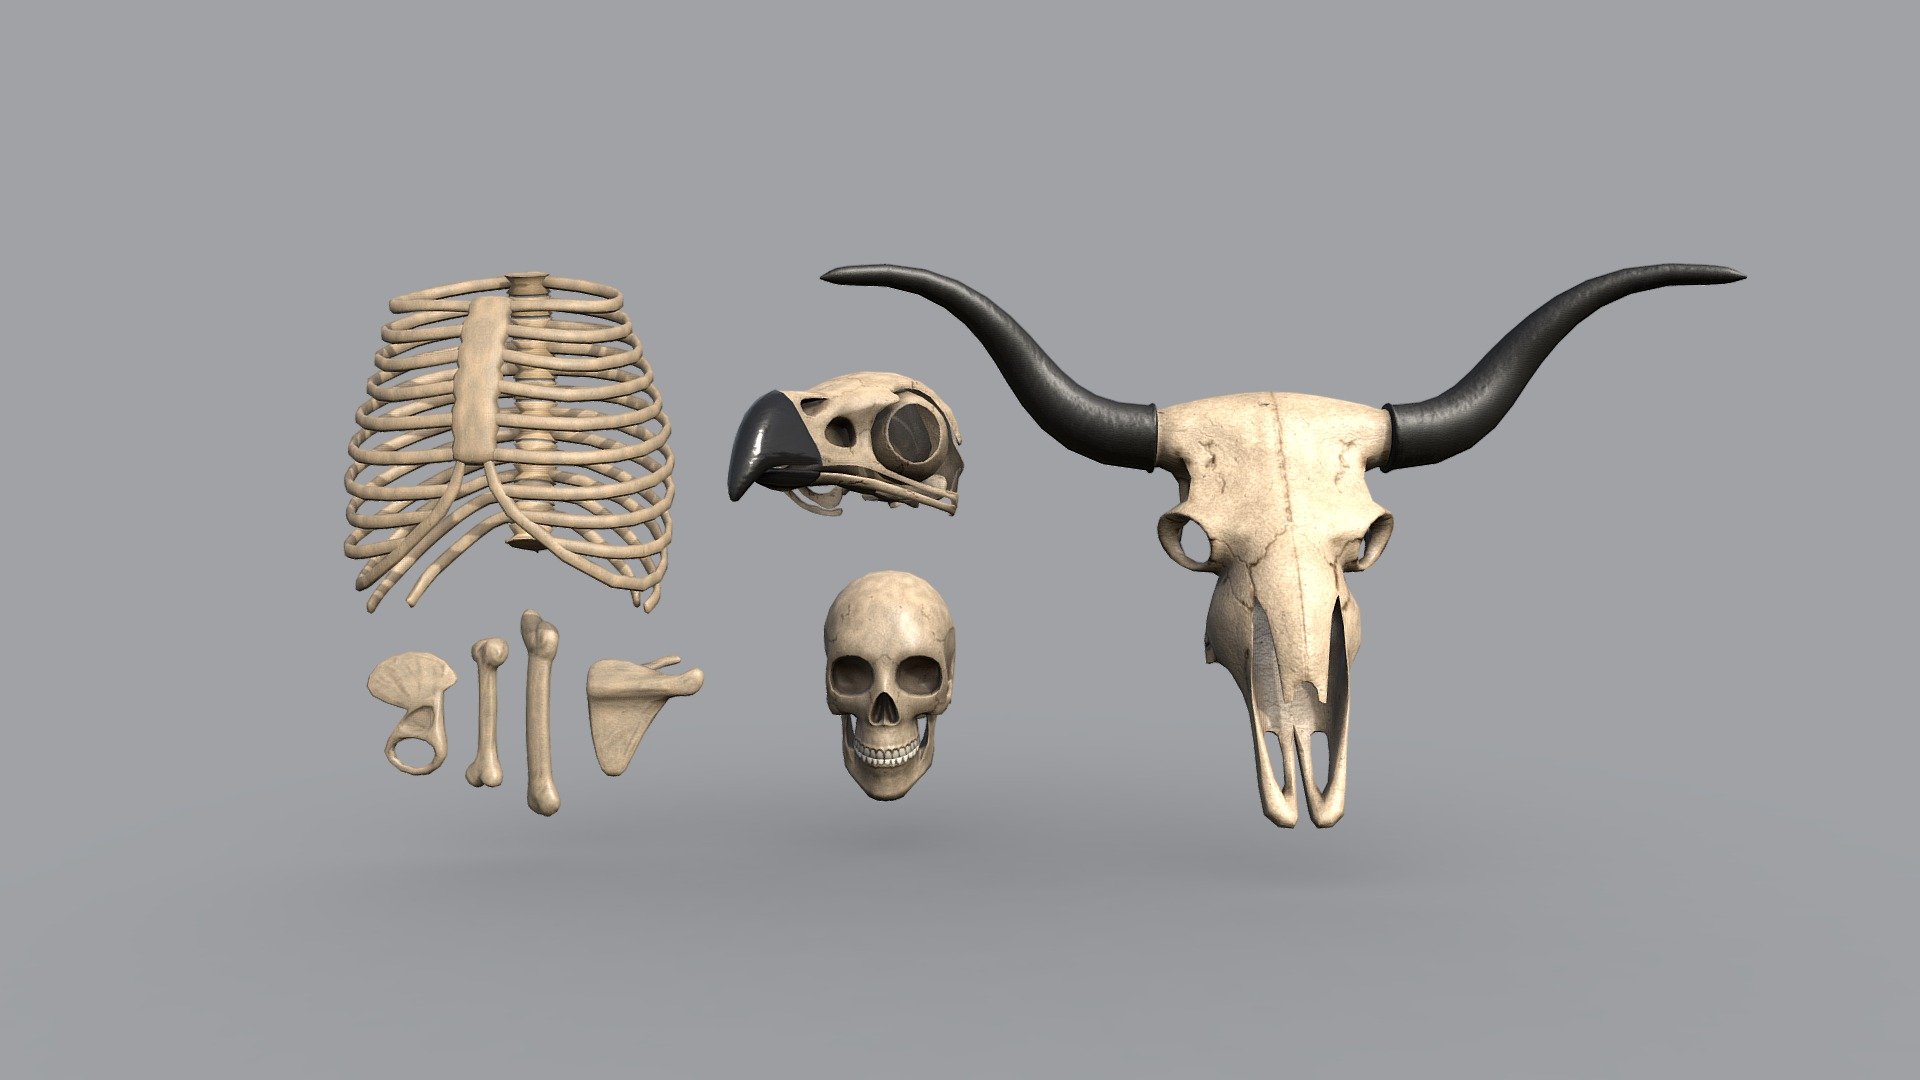 Low poly 3D model pack of human and animal skeleton 3d model